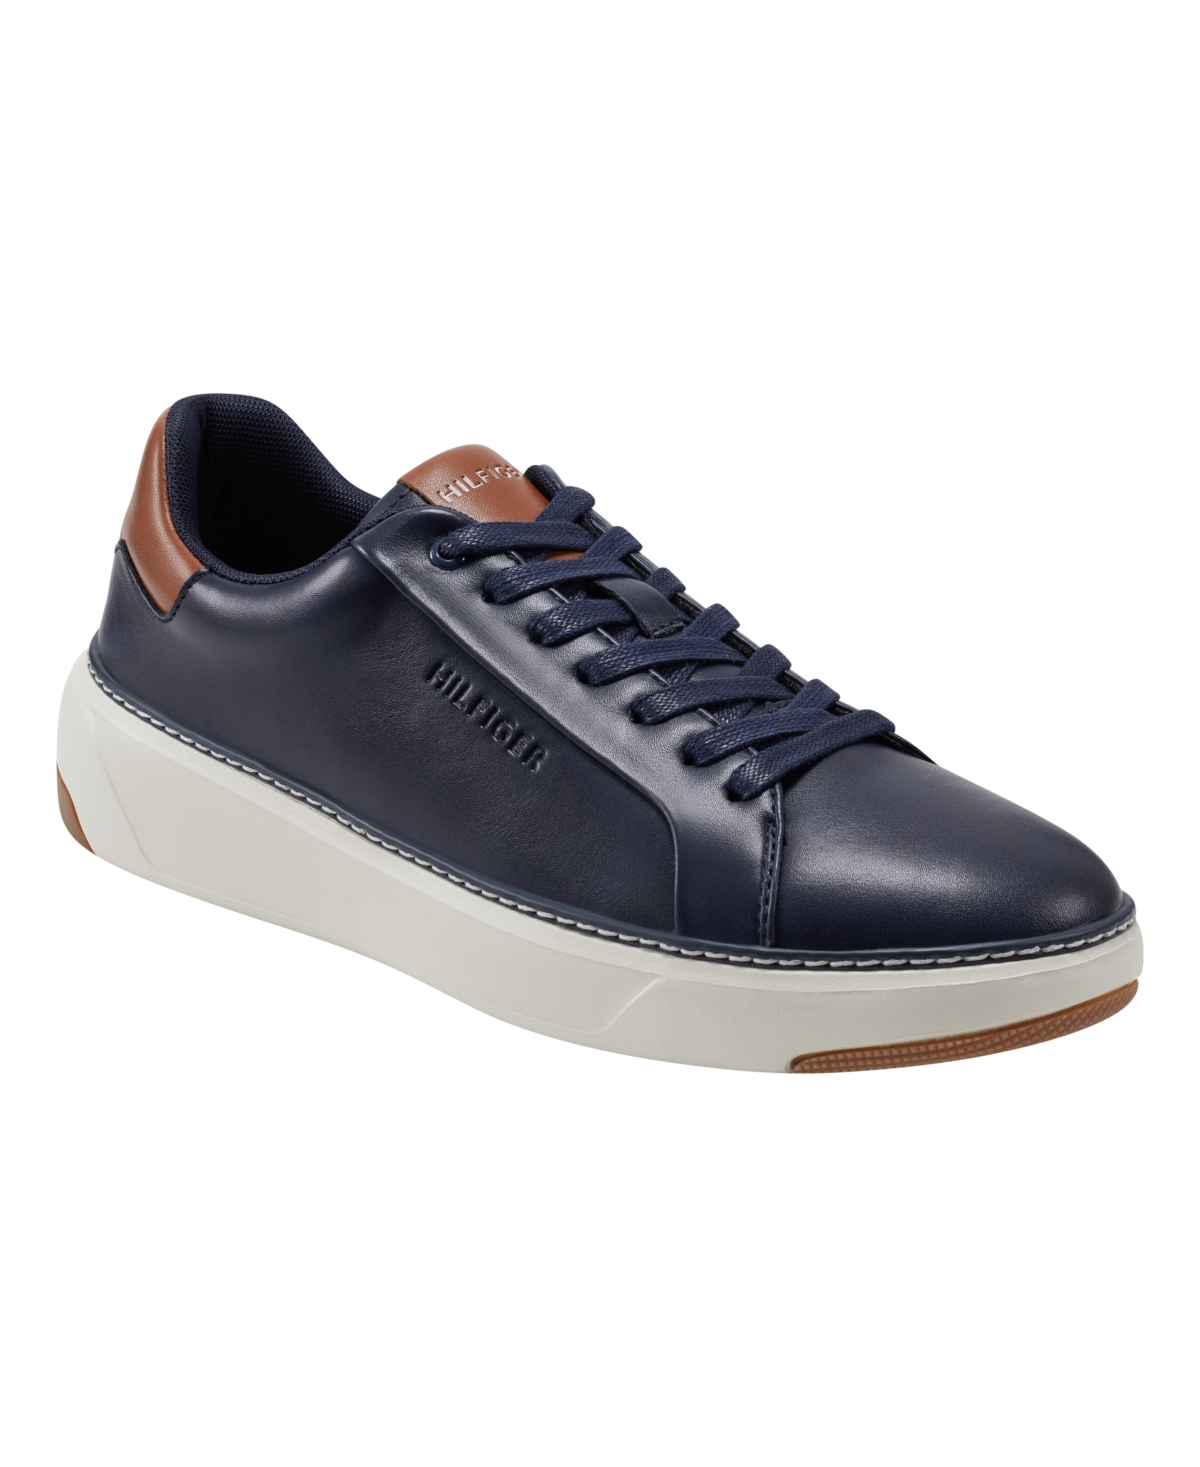 Tommy Hilfiger Men's Hines Lace Up Casual Sneakers Men's Shoes In Black,cognac